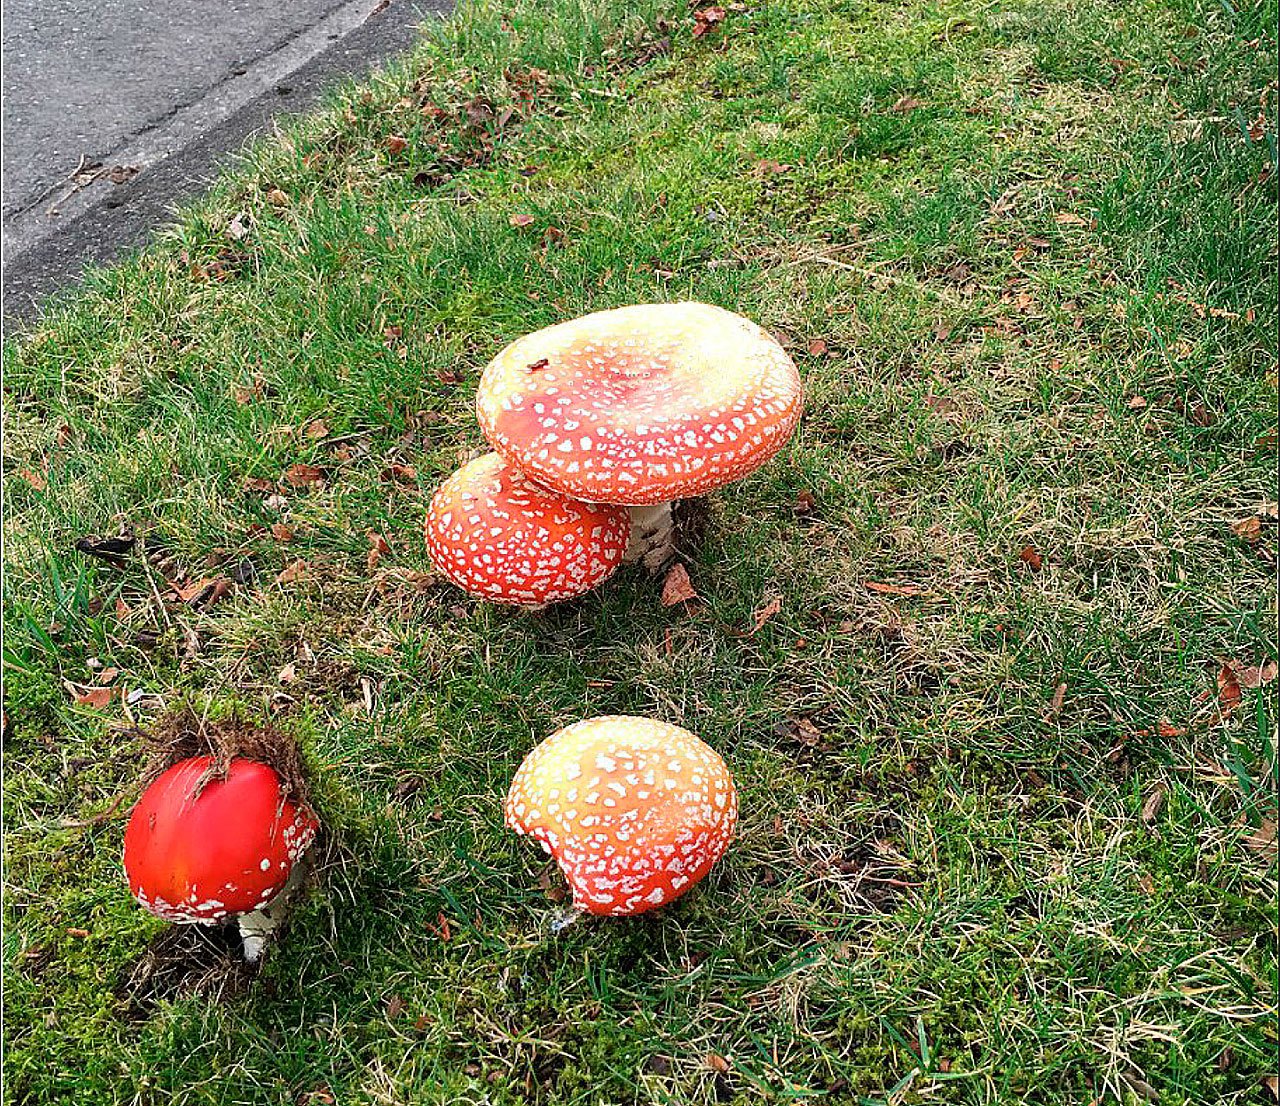 Found on Fairway Avenue S.E. and Douglas Avenue S.E., Amanita Muscaria are poisonous mushrooms that can cause symptoms from nausea and discomfort to liver or kidney damage. (Courtesy Photo)